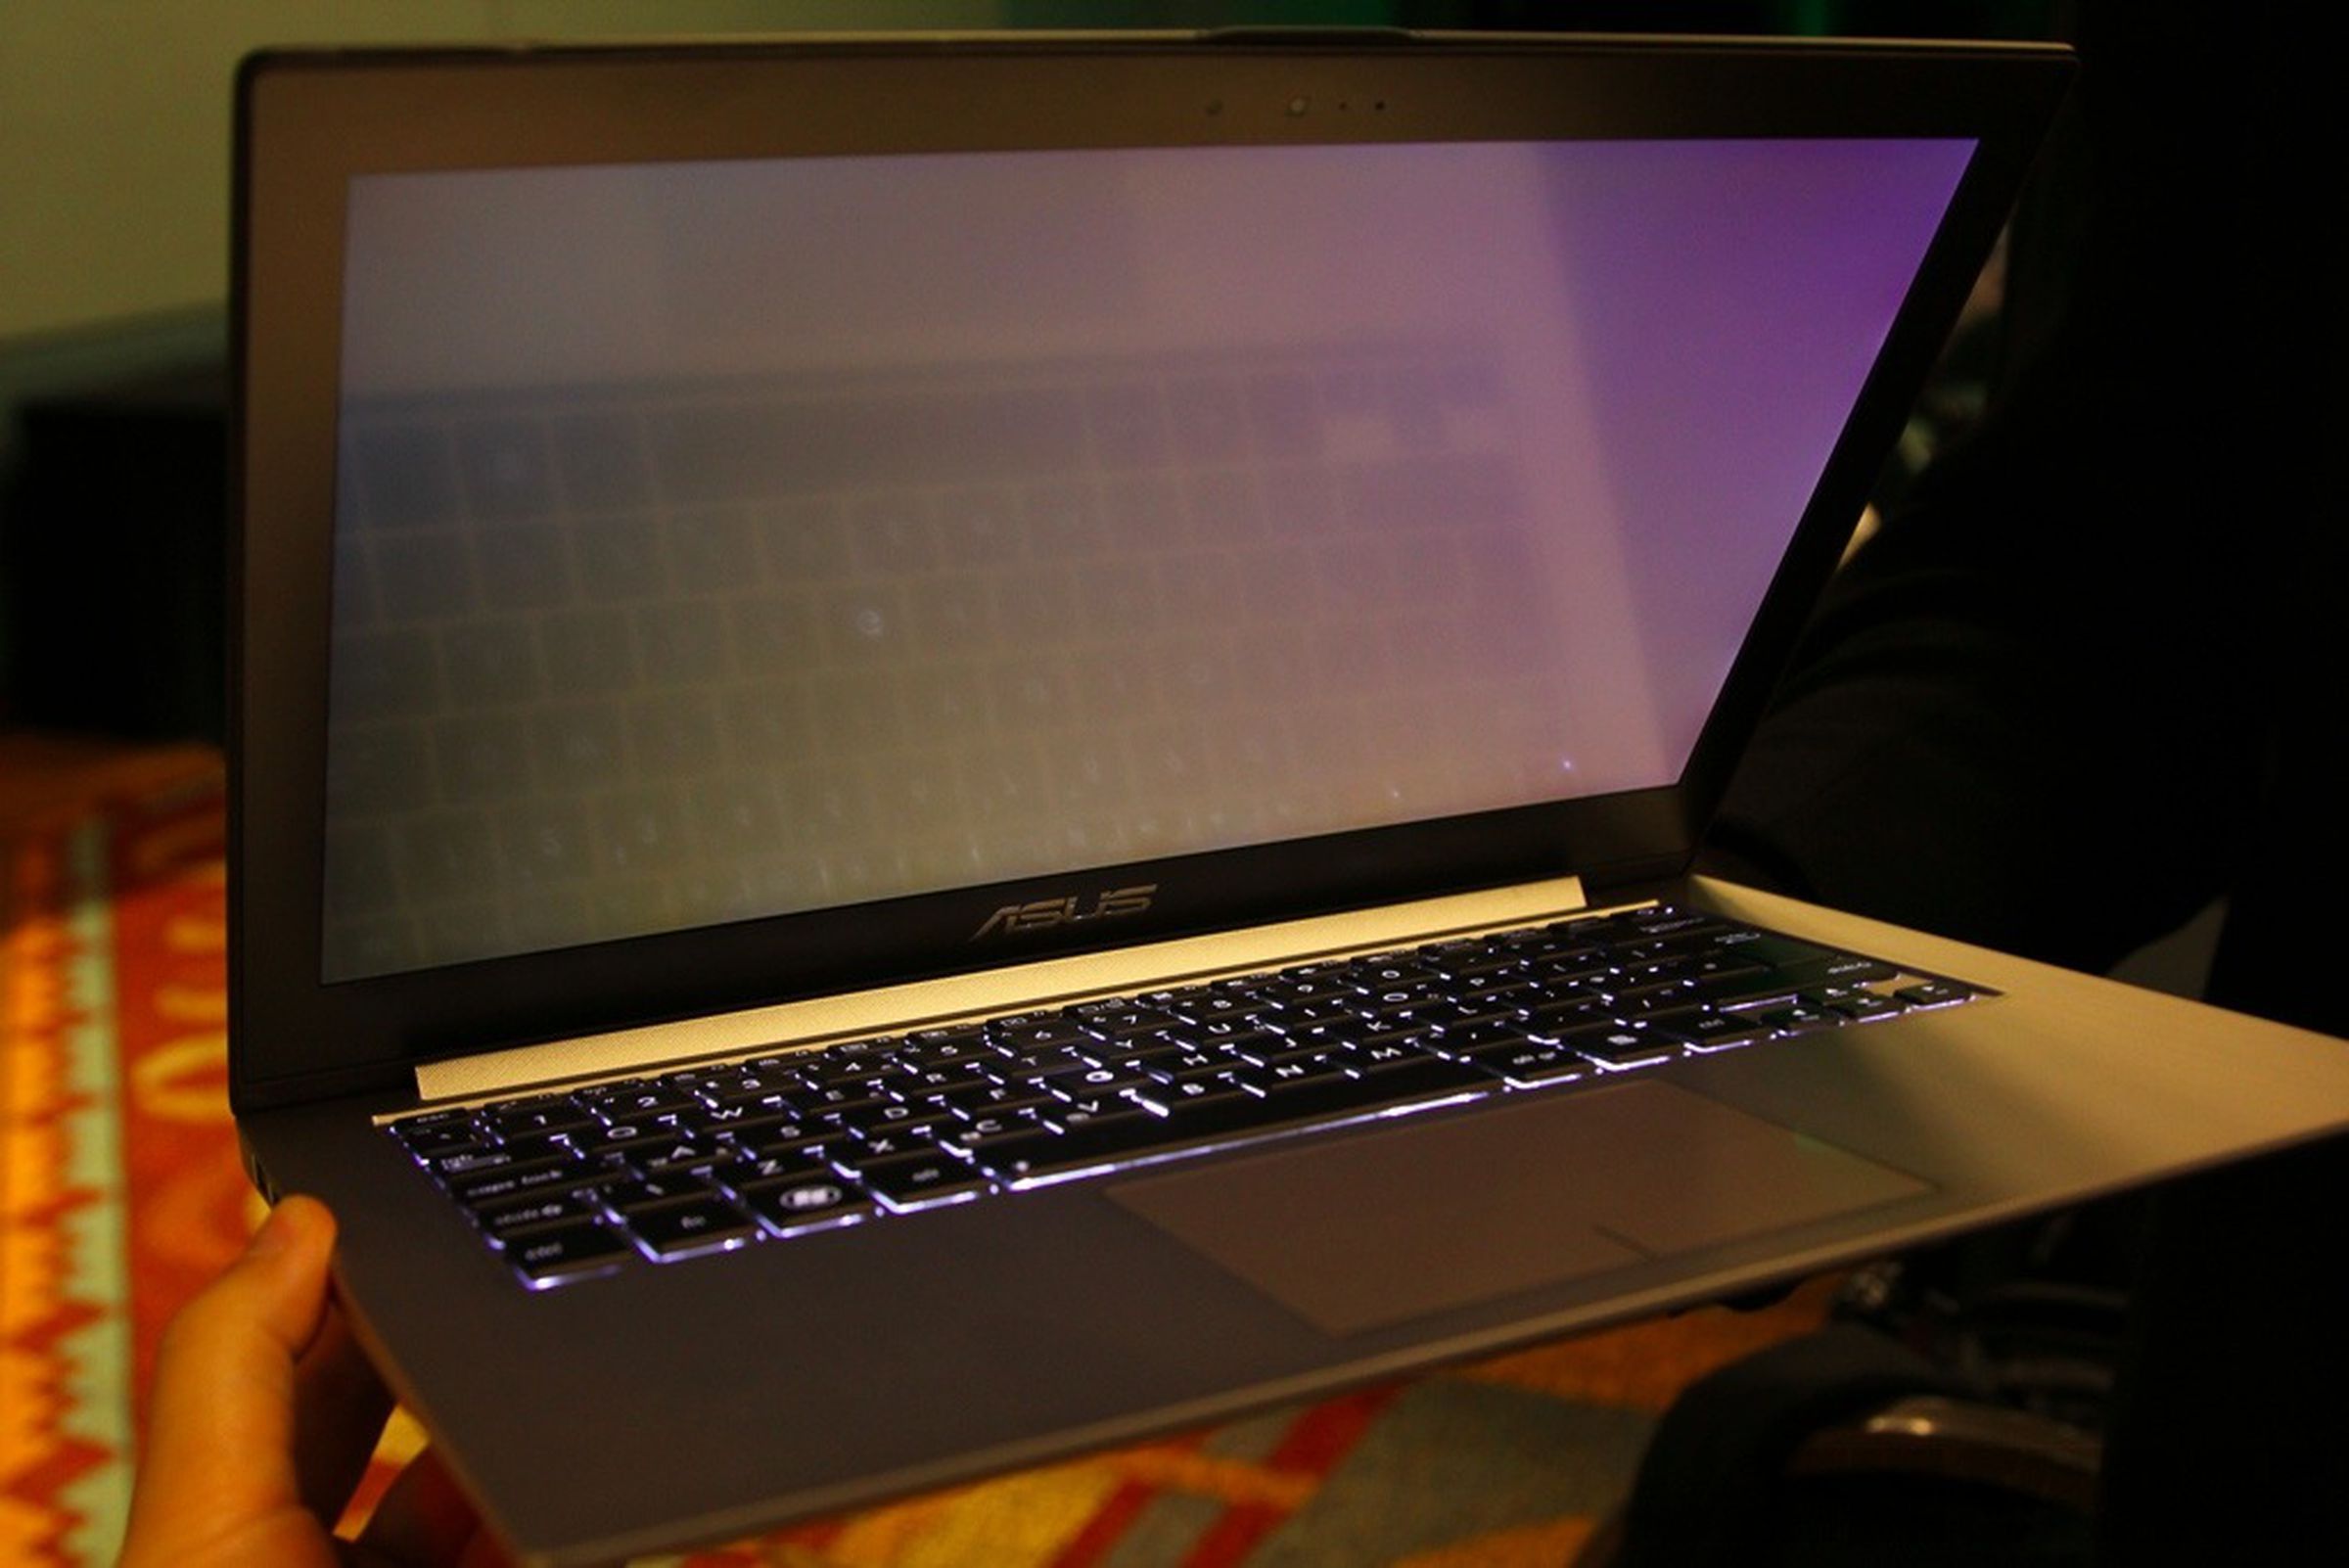 Asus Zenbook Prime UX32VD hands-on pictures